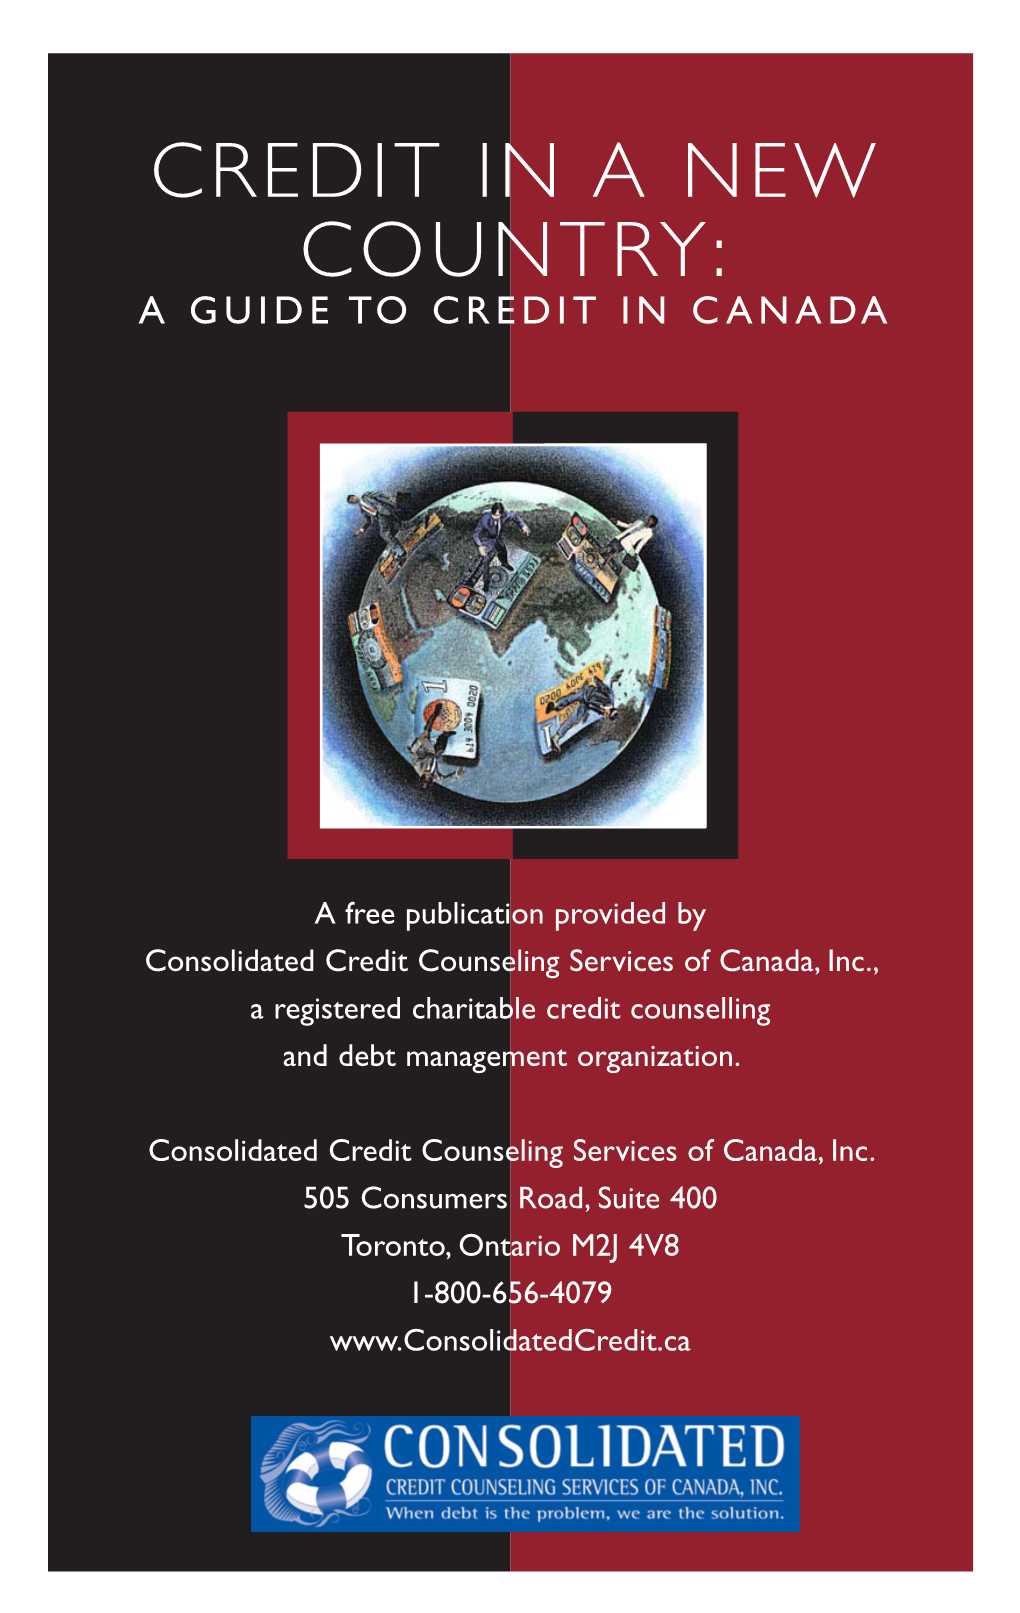 Credit in a New Country: a Guide to Credit in Canada